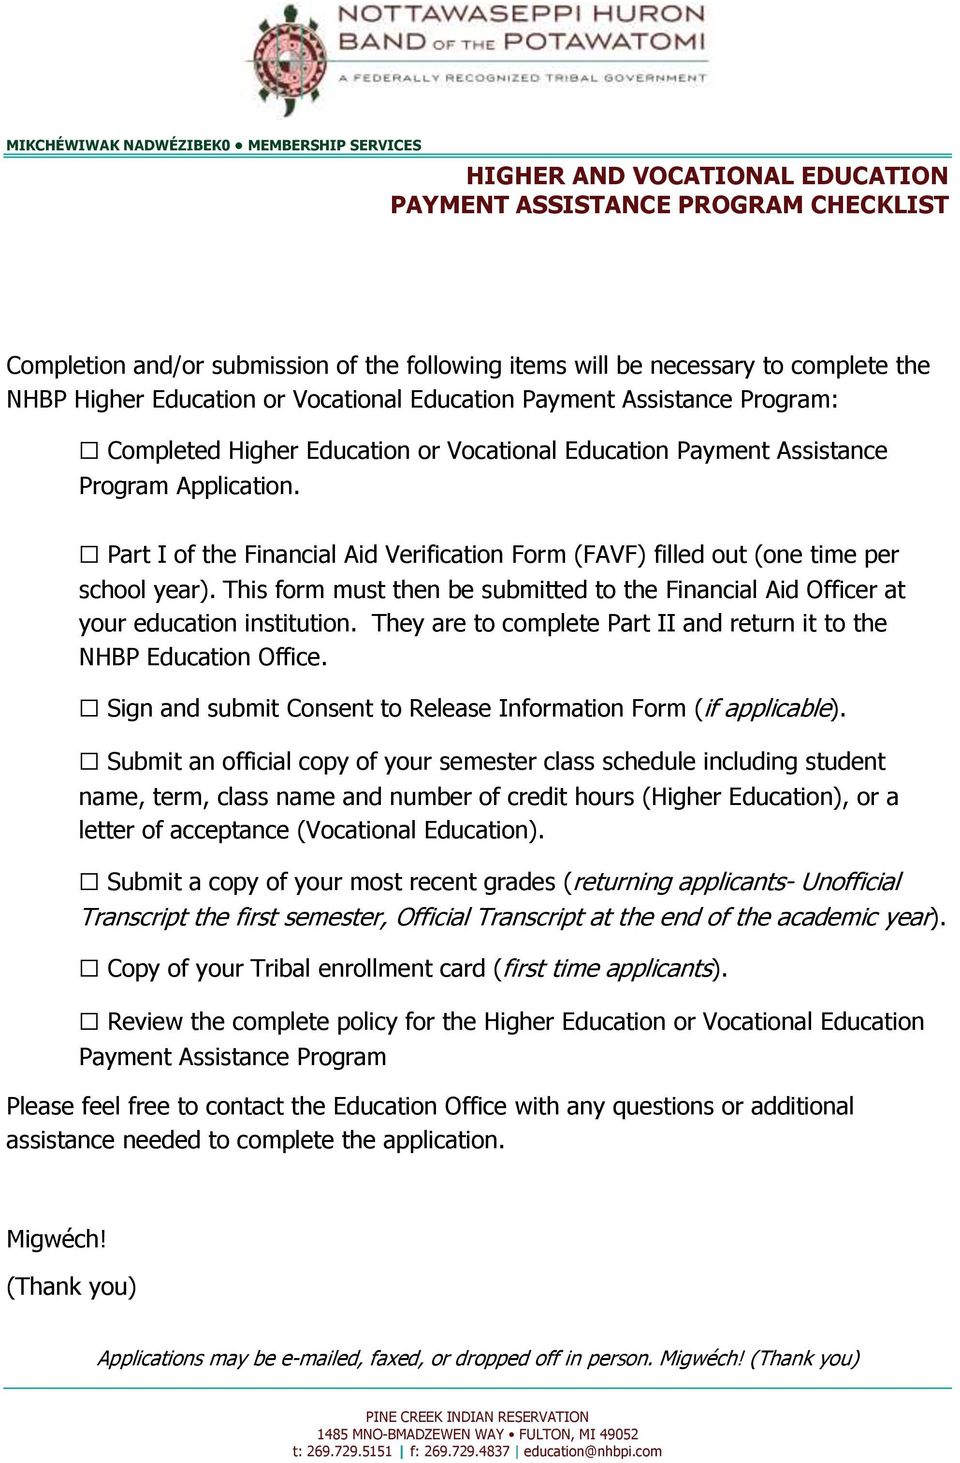 This form must then be submitted to the Financial Aid Officer at your education institution. They are to complete Part II and return it to the NHBP Education Office.